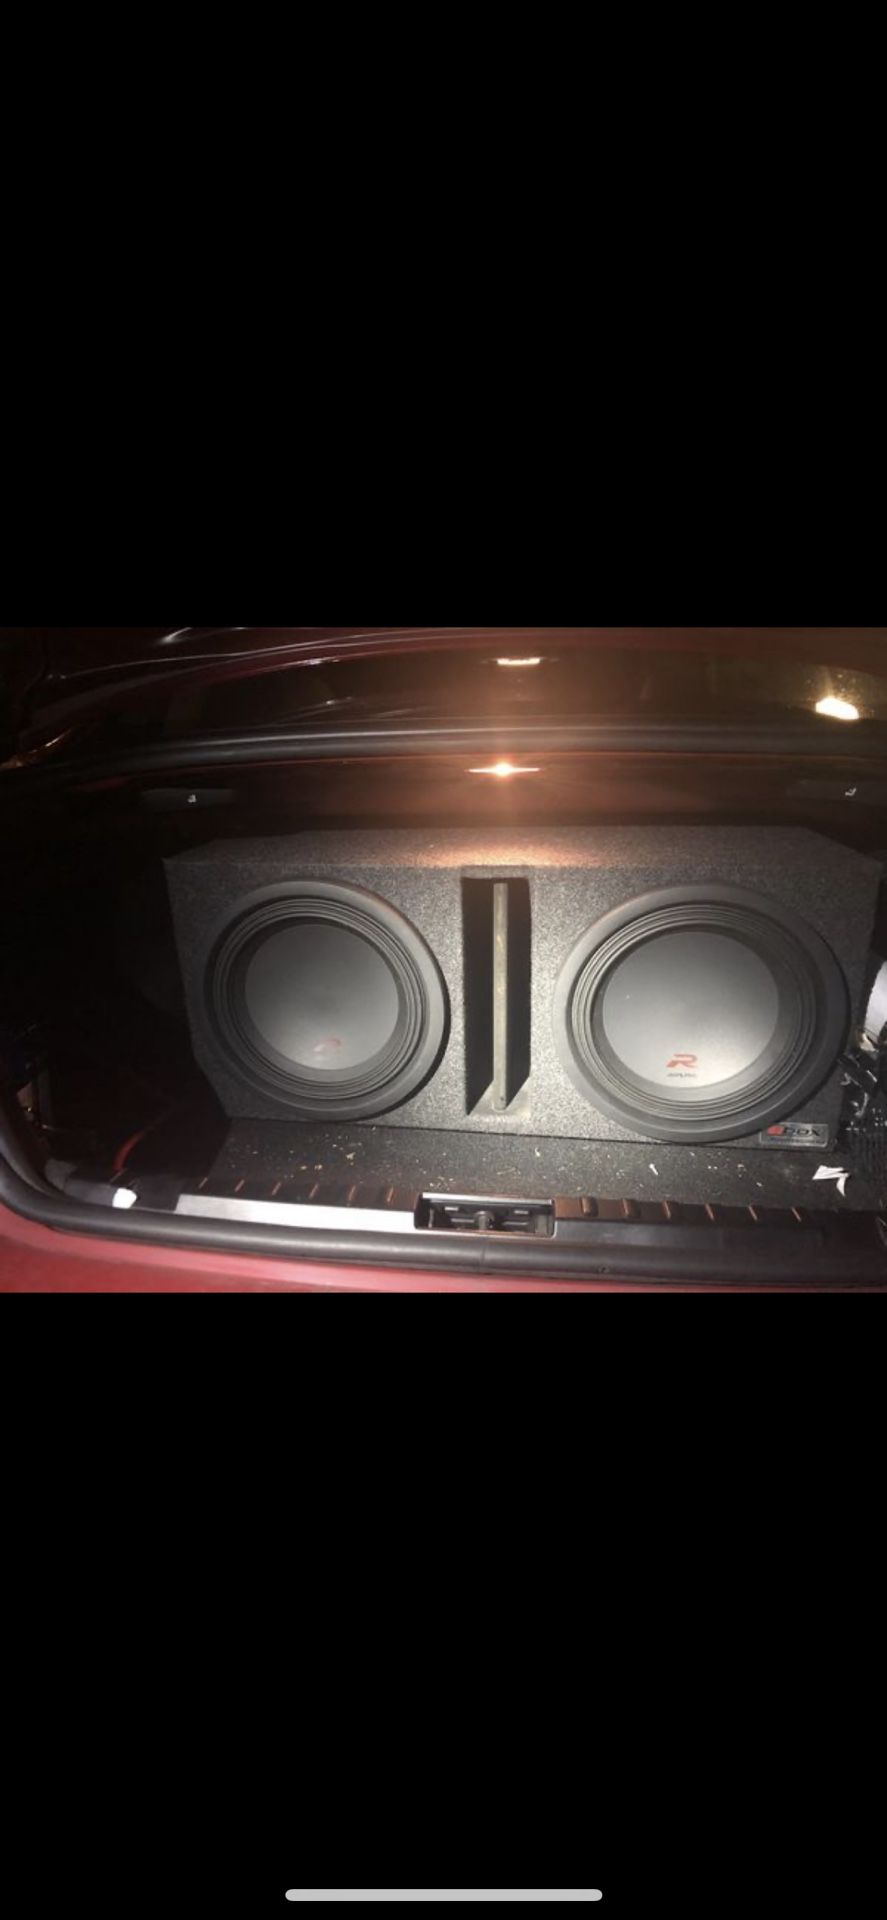 Alpine Type R 2 12 inch Subwoofers latest edition with Rockford Fosgate Power T1500-1bdCP (Constant Power) Bass package!!